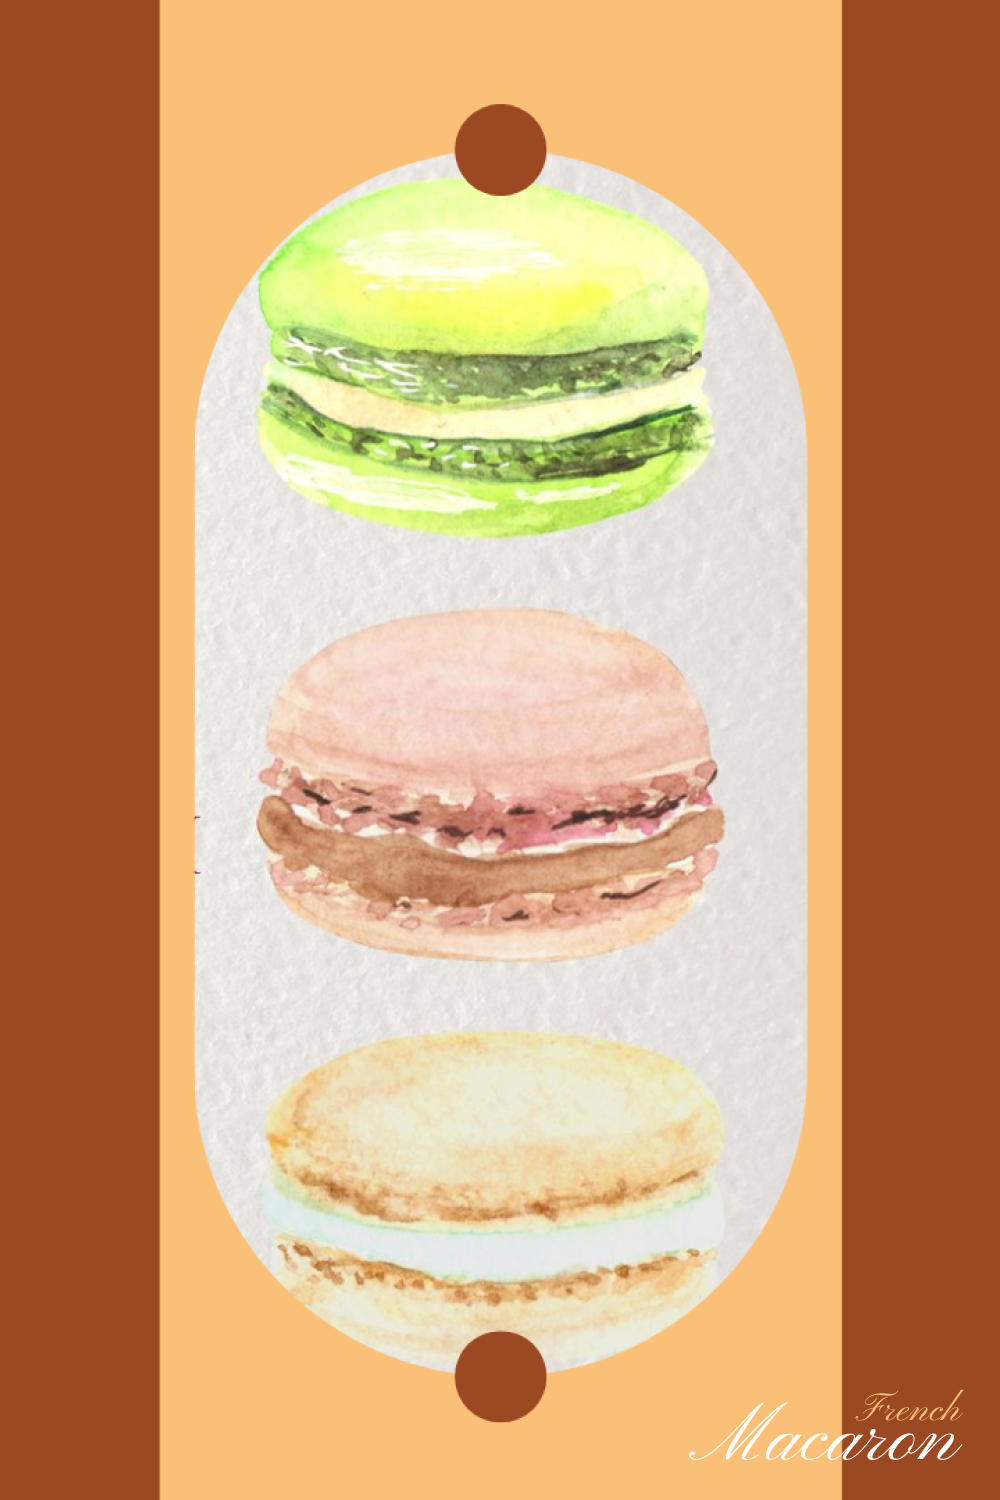 macaron french watercolor clipart 1